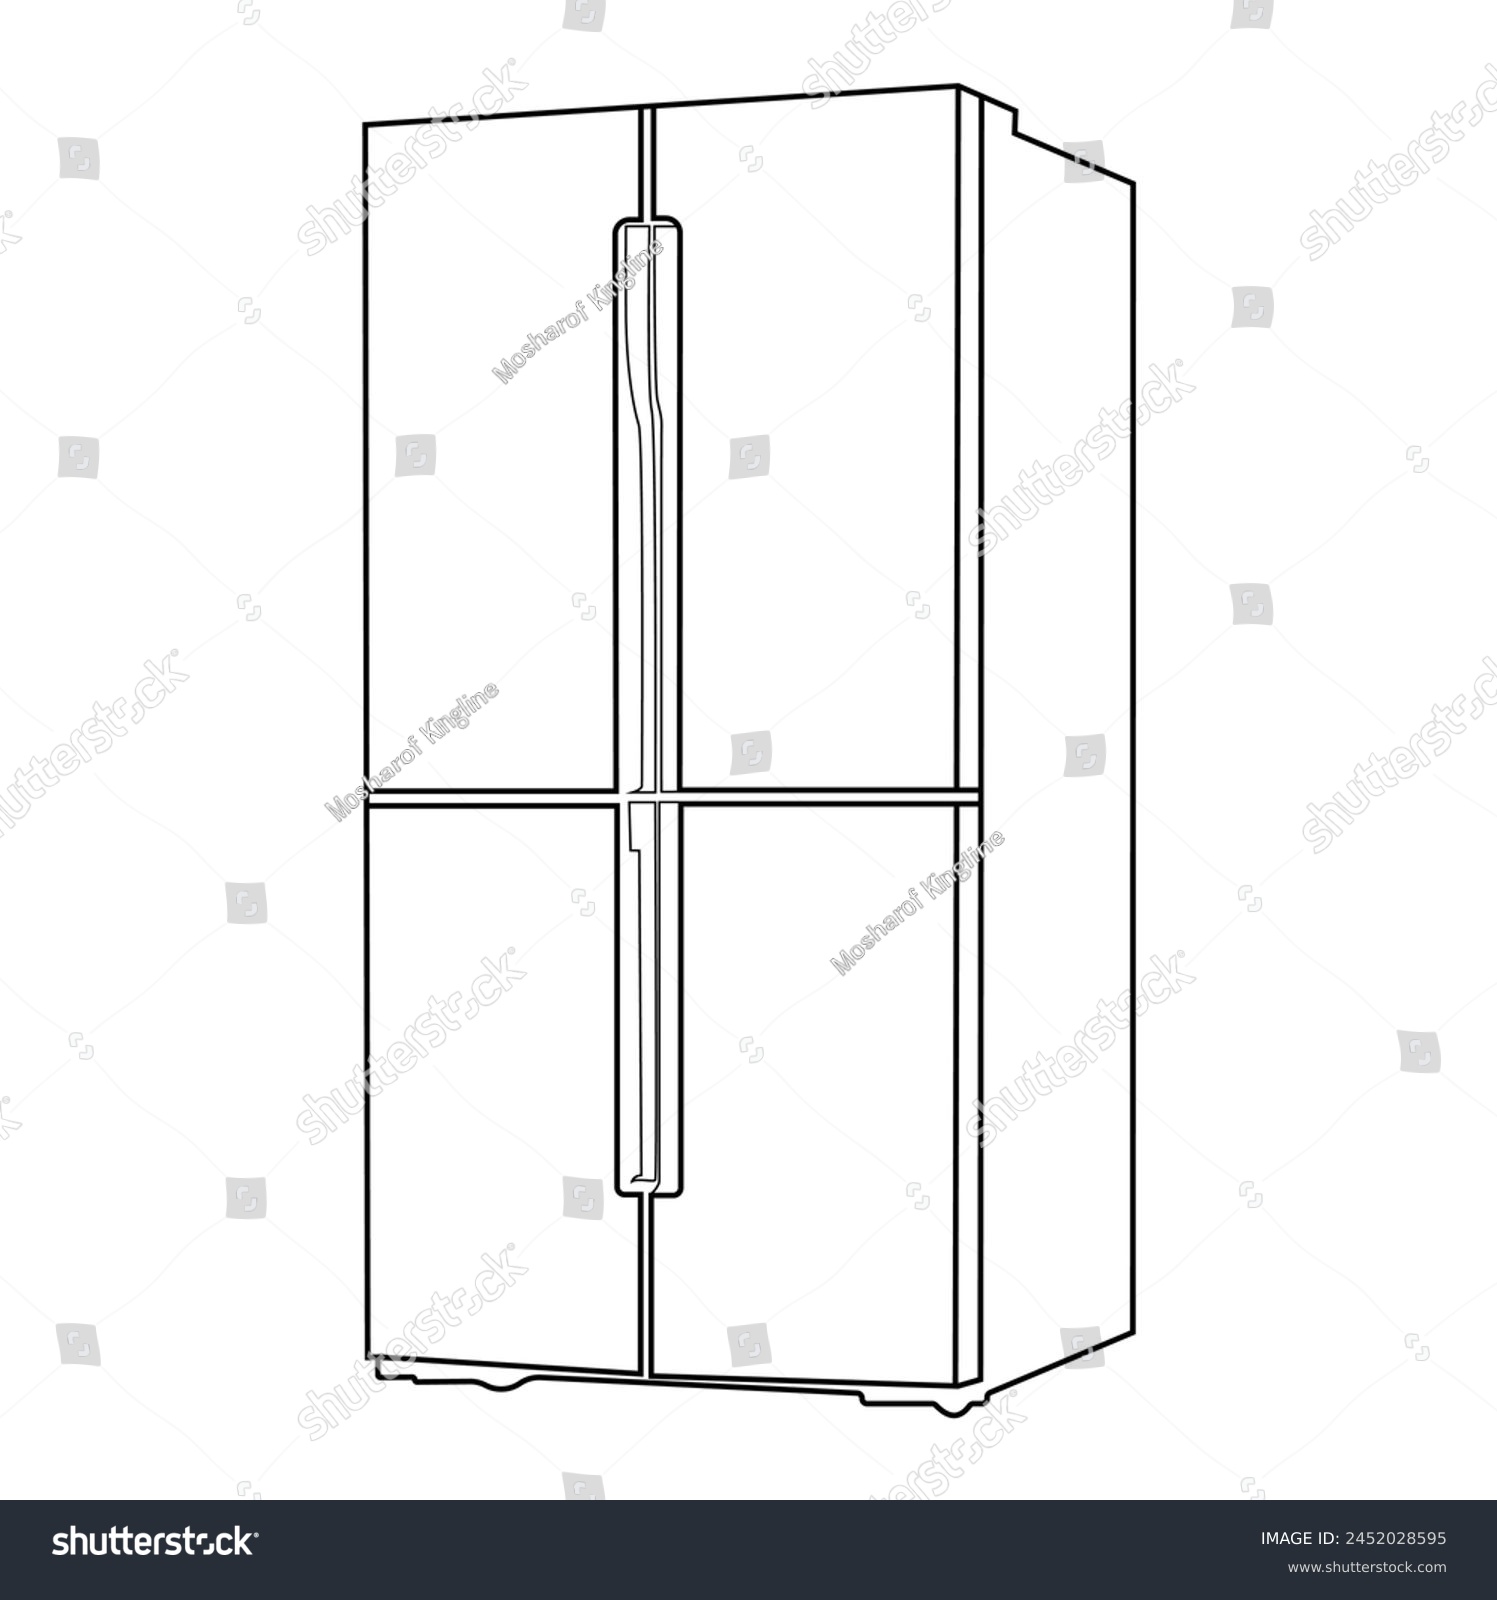 SVG of Refrigerator sizes chart line icon. Clipart image isolated on white background. New classic grey cooler icebox frig with Illustration style doodle and line art svg